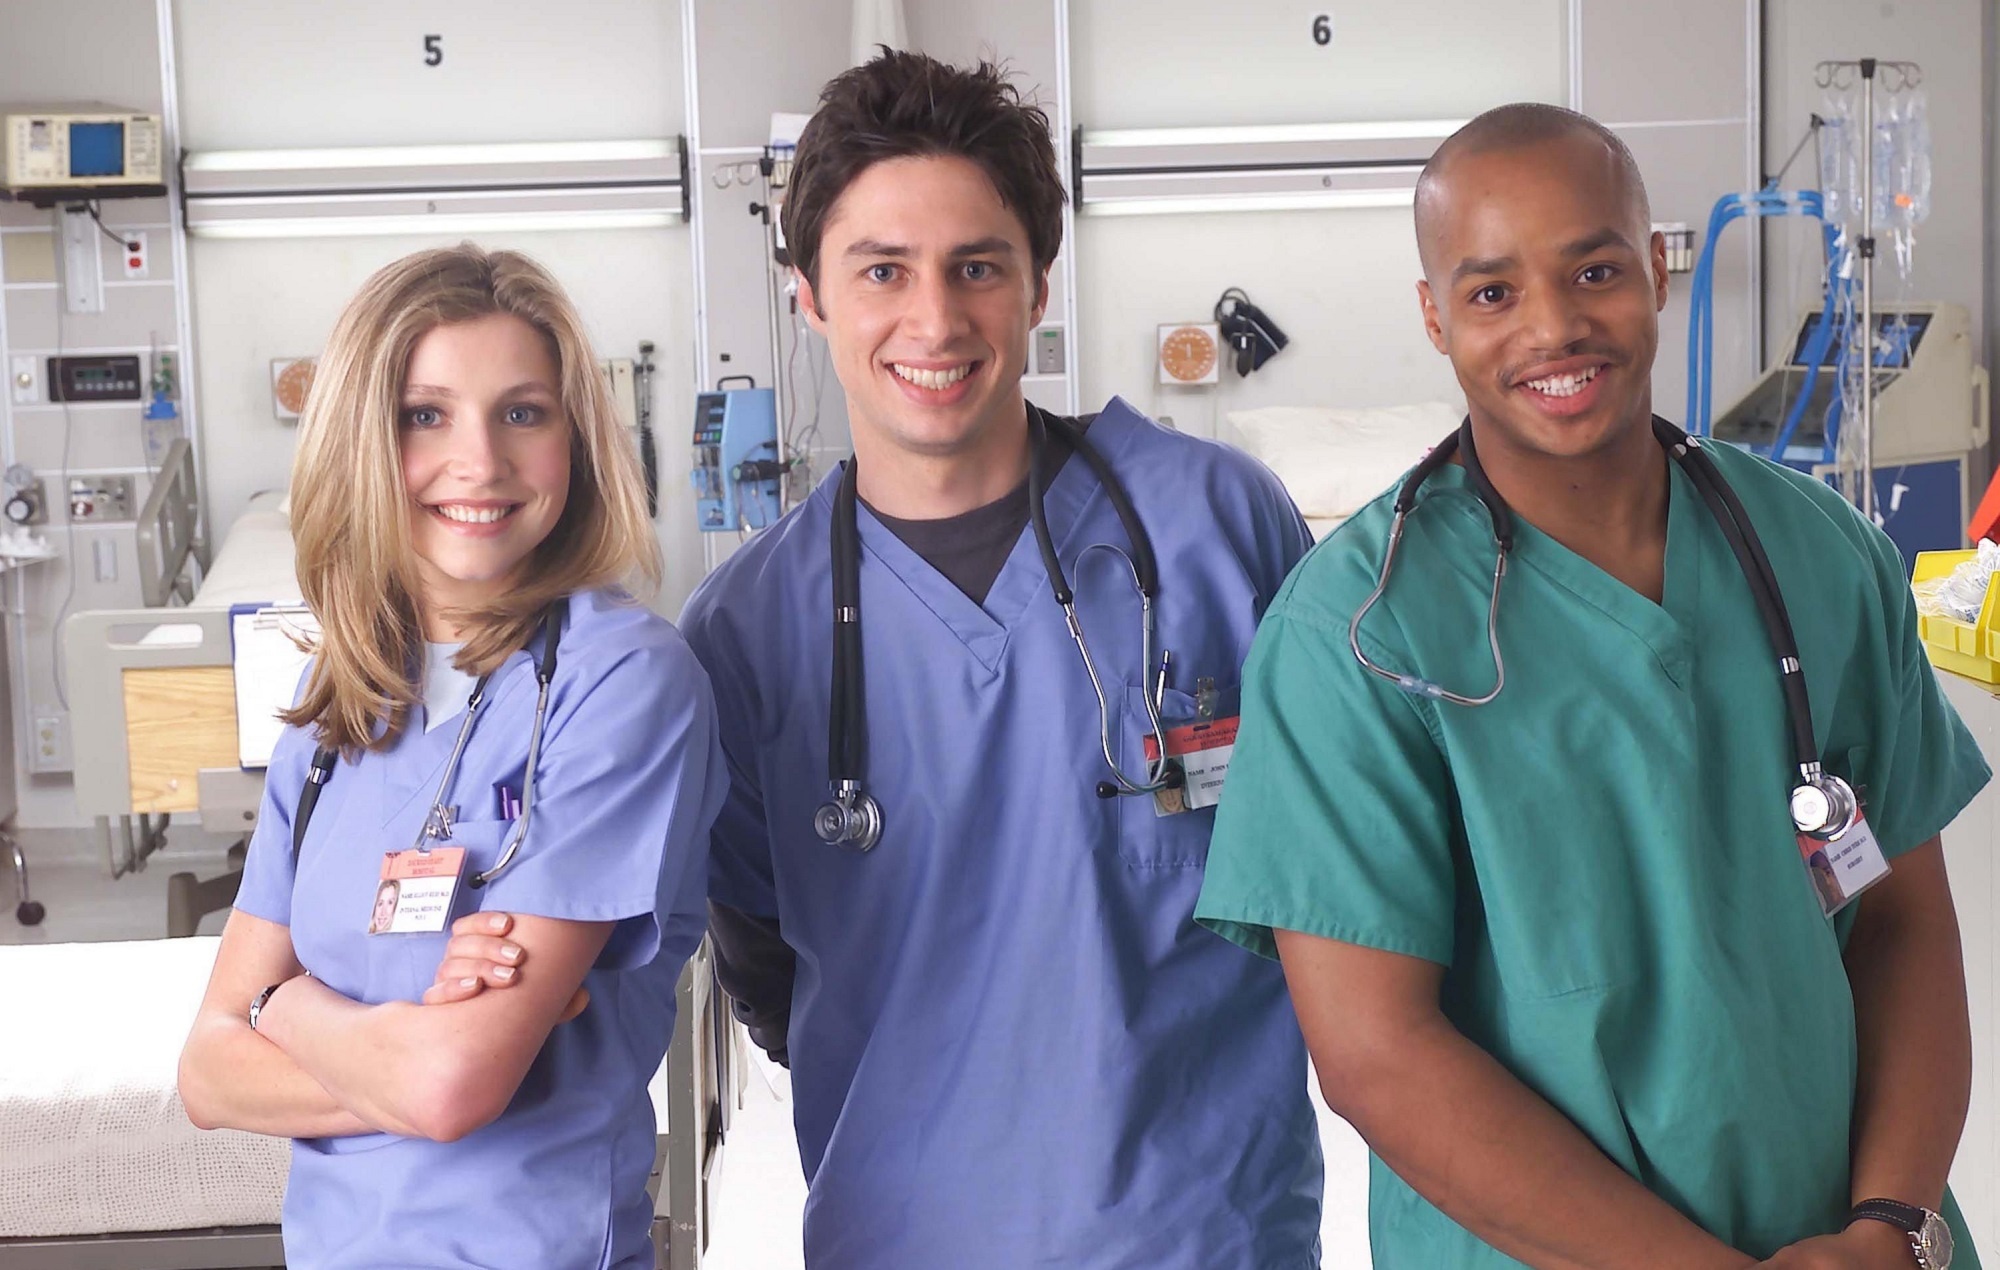 Zach Braff: An American actor whose first major role in a television show was J.D. in Scrubs which debuted in 2001. 2000x1270 HD Background.